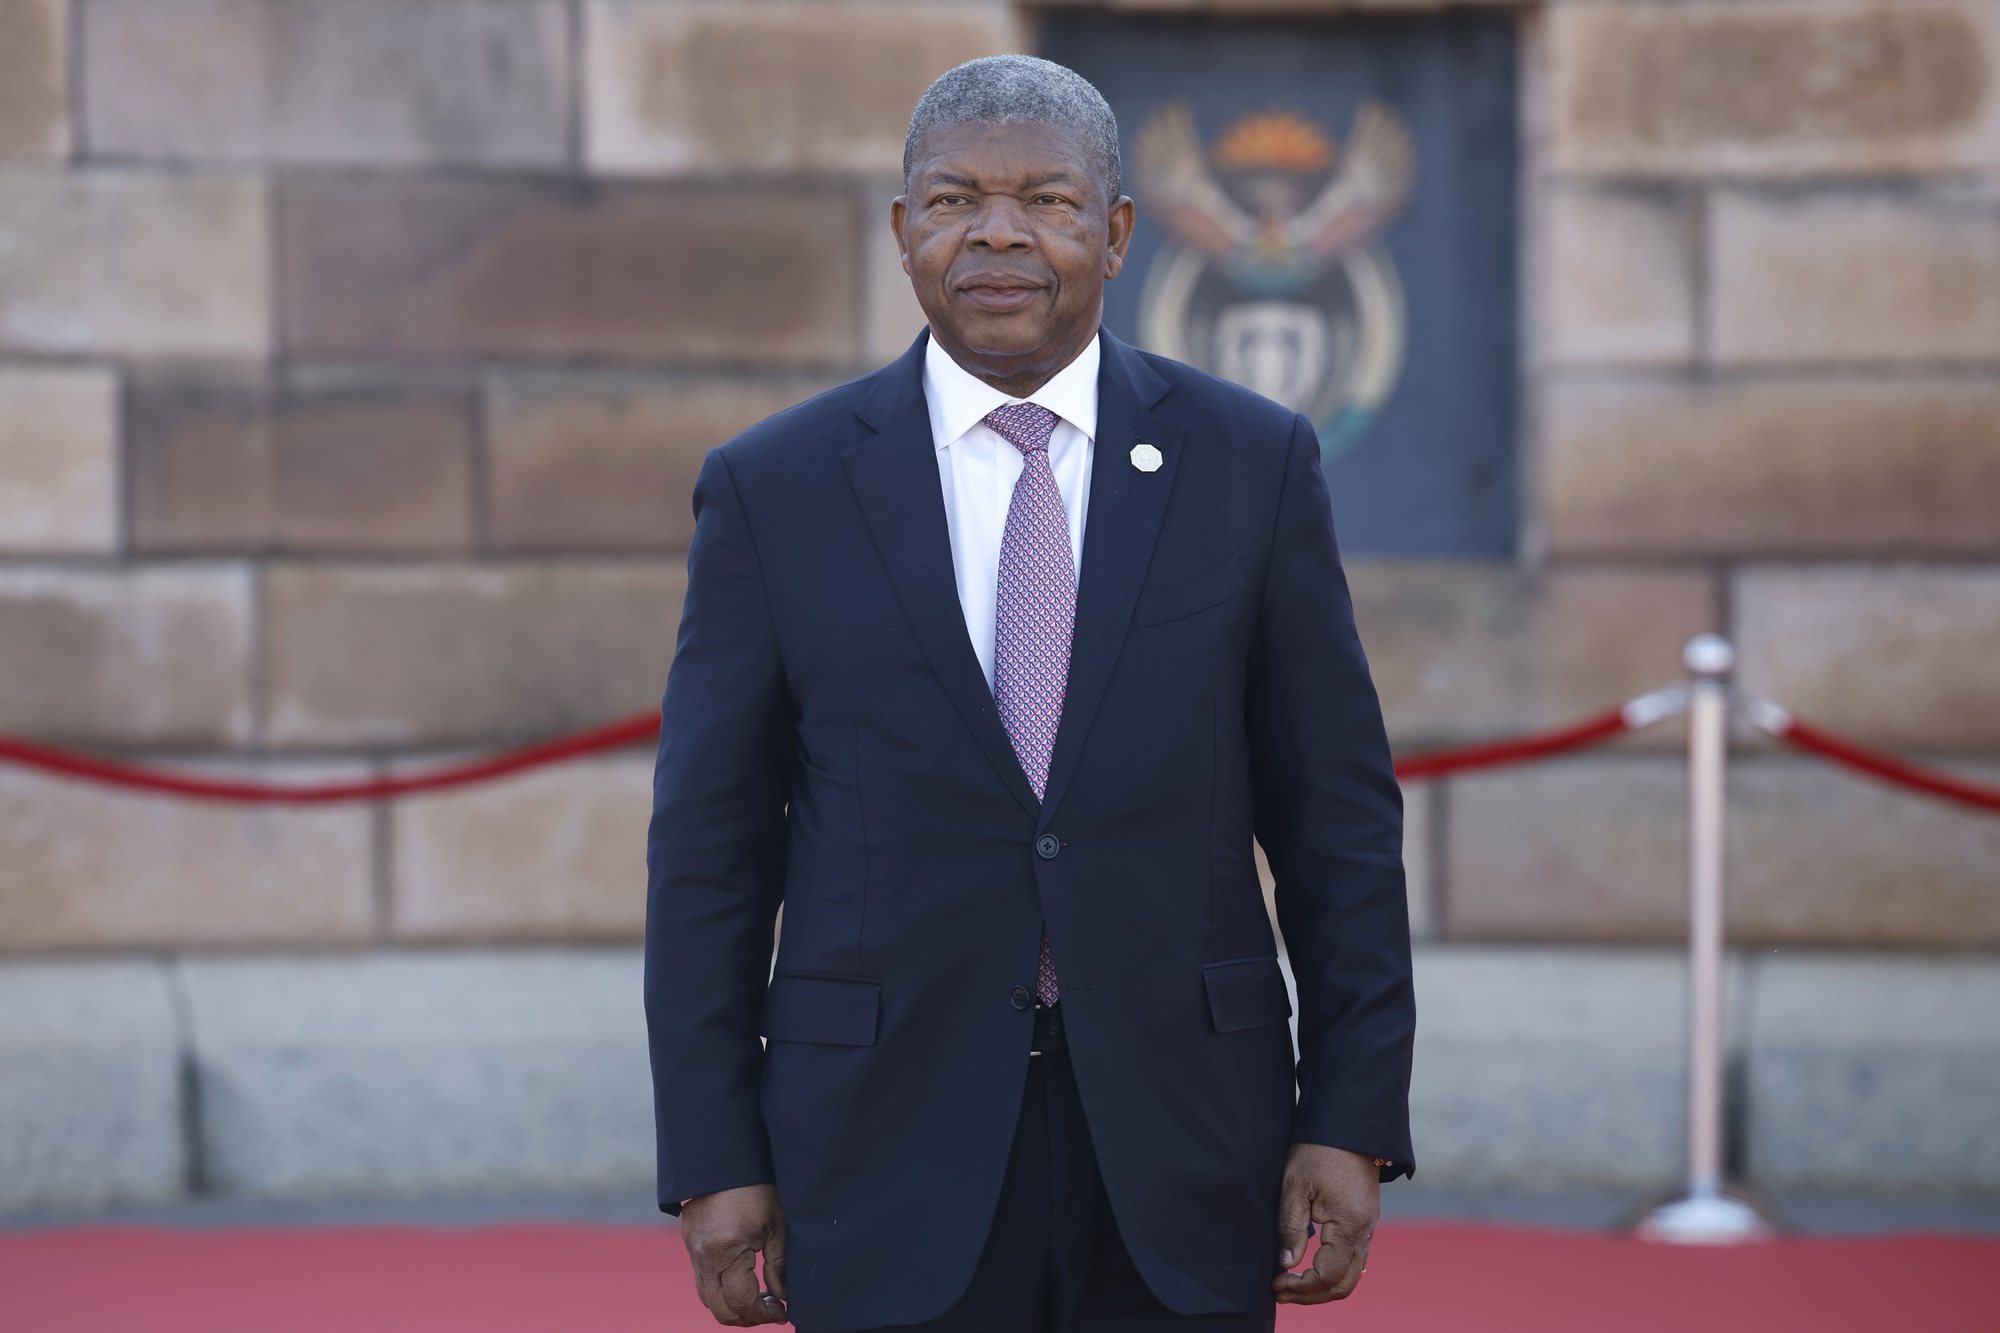 epa11422827 Angolan President Joao Lourenco arrives for Cyril Ramaphosa&#039;s inauguration ceremony as South Africa&#039;s president at the Union Buildings in Pretoria, South Africa, 19 June 2024. Ramaphosa was re-elected as South Africa&#039;s president by the National Assembly on 14 June 2024, following the country&#039;s general elections held on 29 May 2024. South Africa President Cyril Ramaphosa will be sworn in for his second term on 19 June.  EPA/PHILL MAGAKOE / POOL